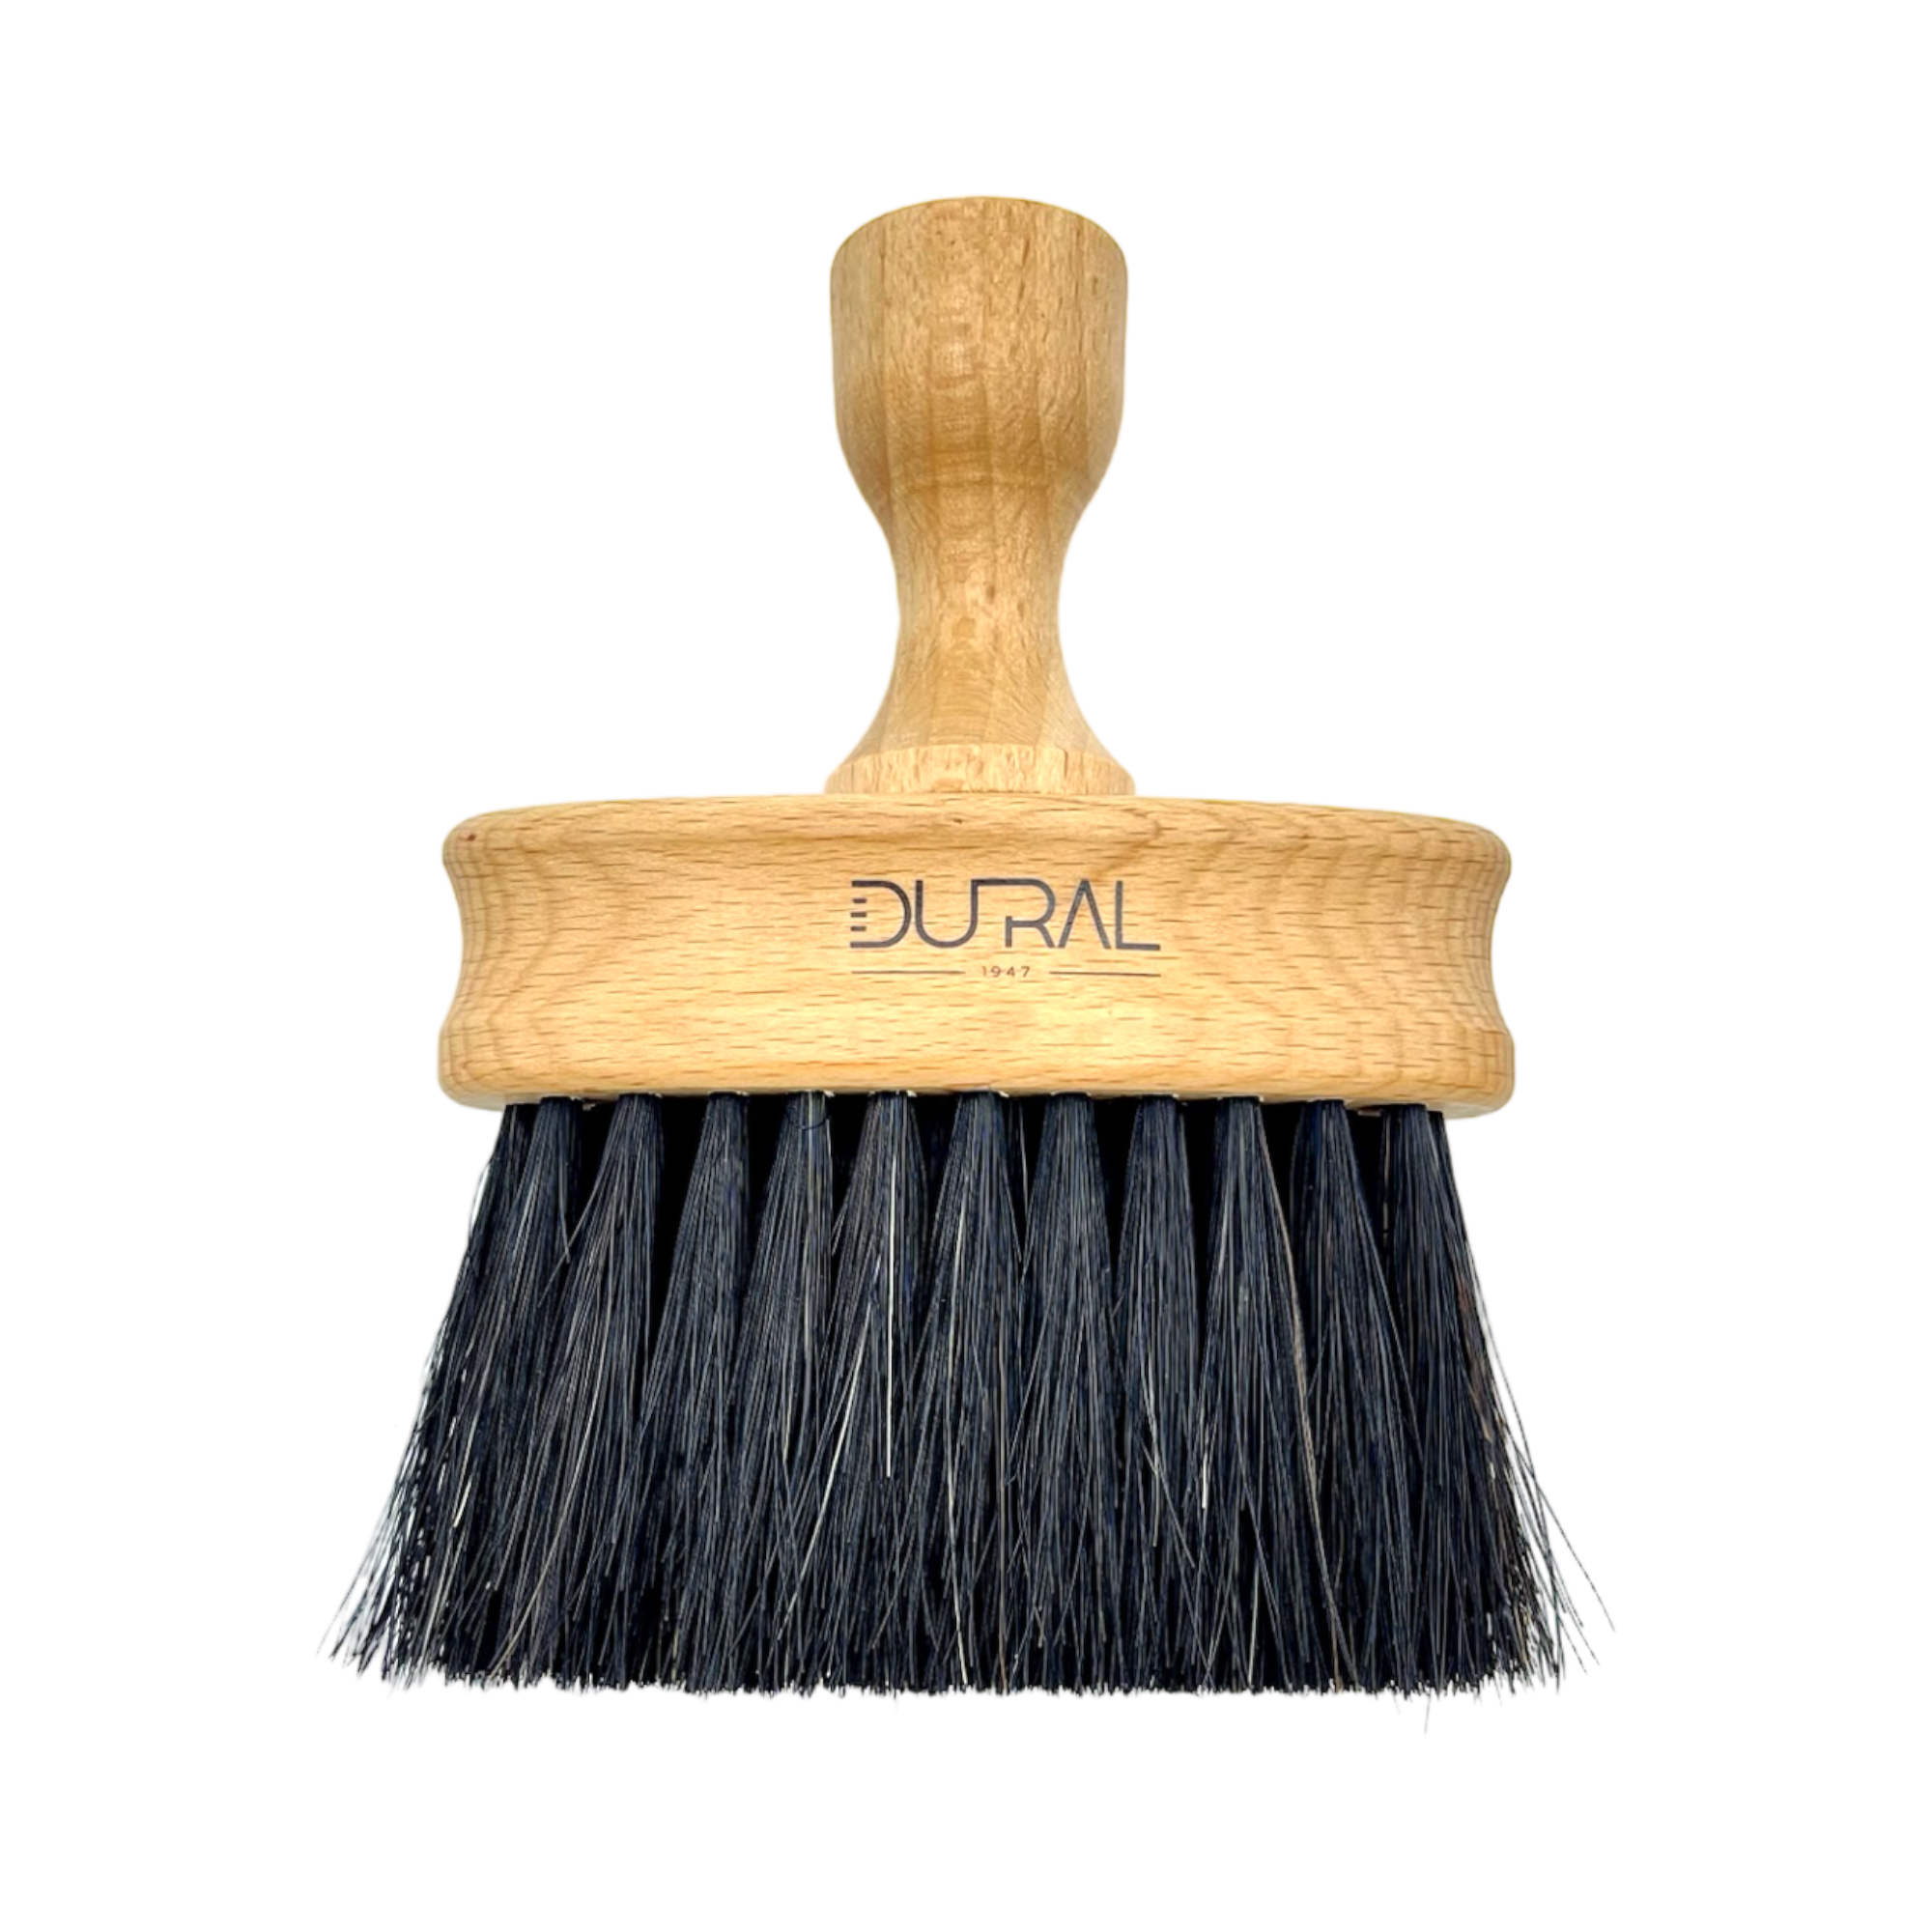 Dural Beech wood oval neck duster